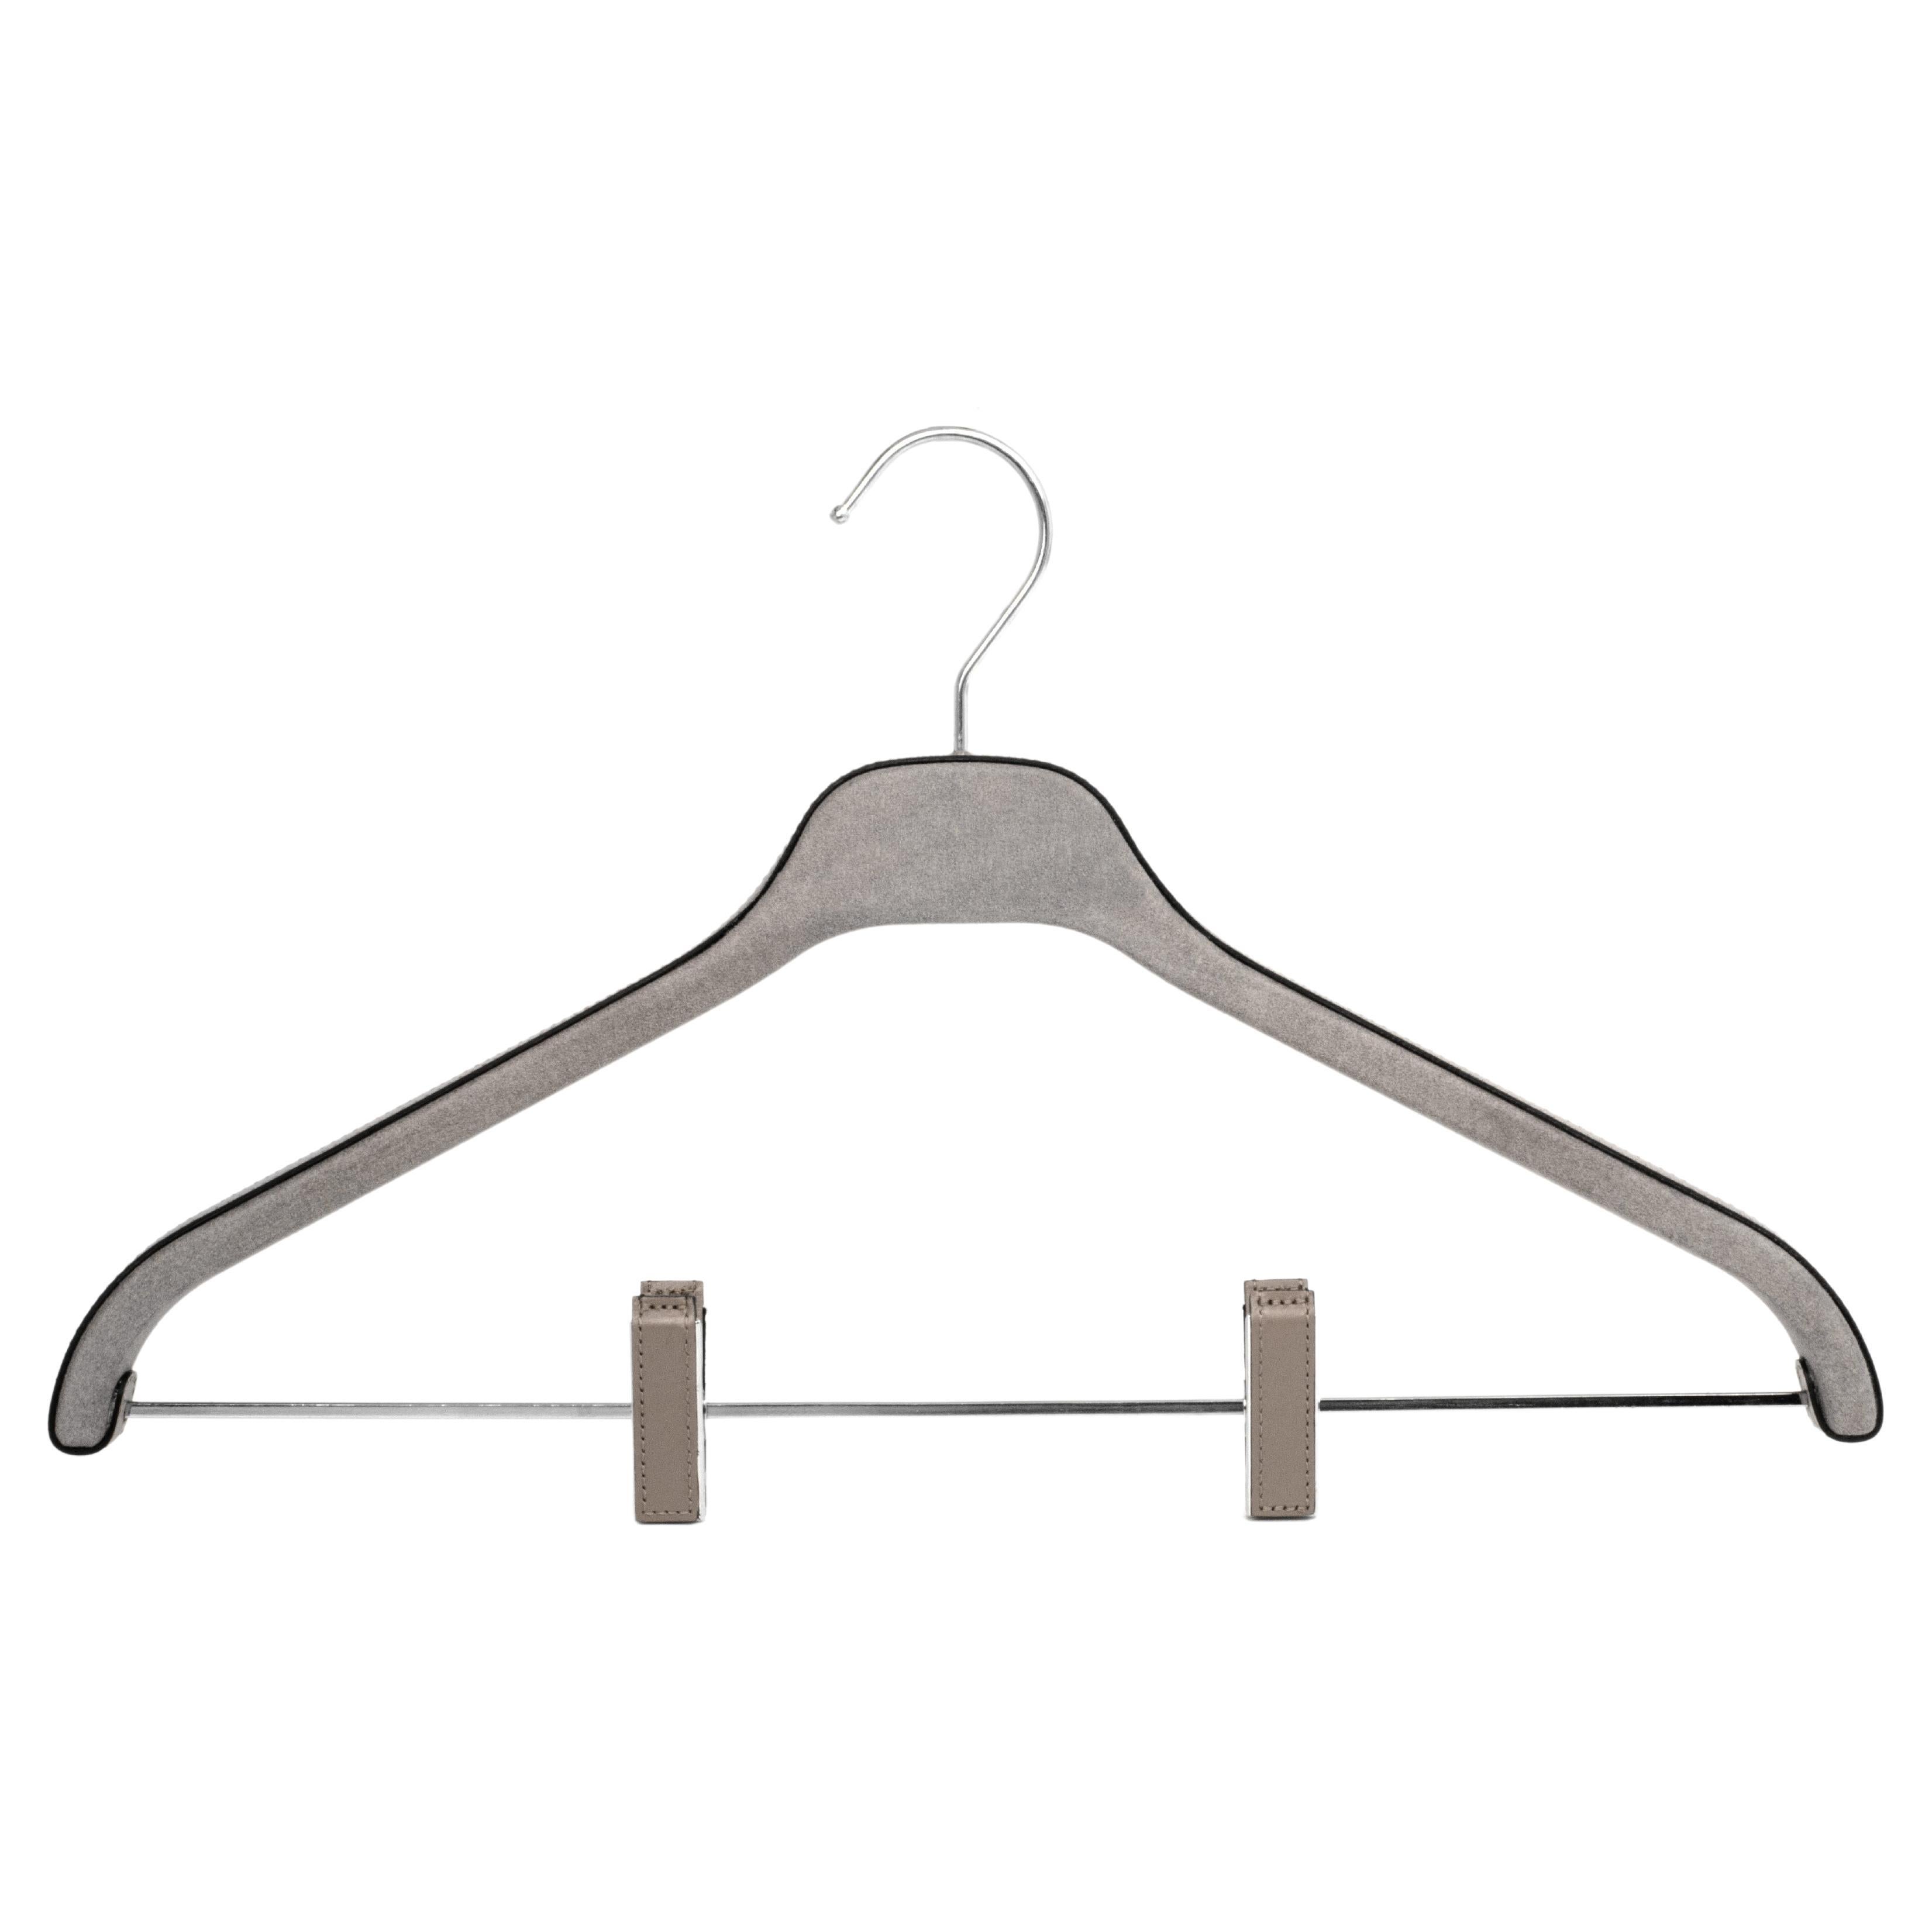 21st Century Trousers Hanger with Clips Suede & Leather Handcrafted in Italy